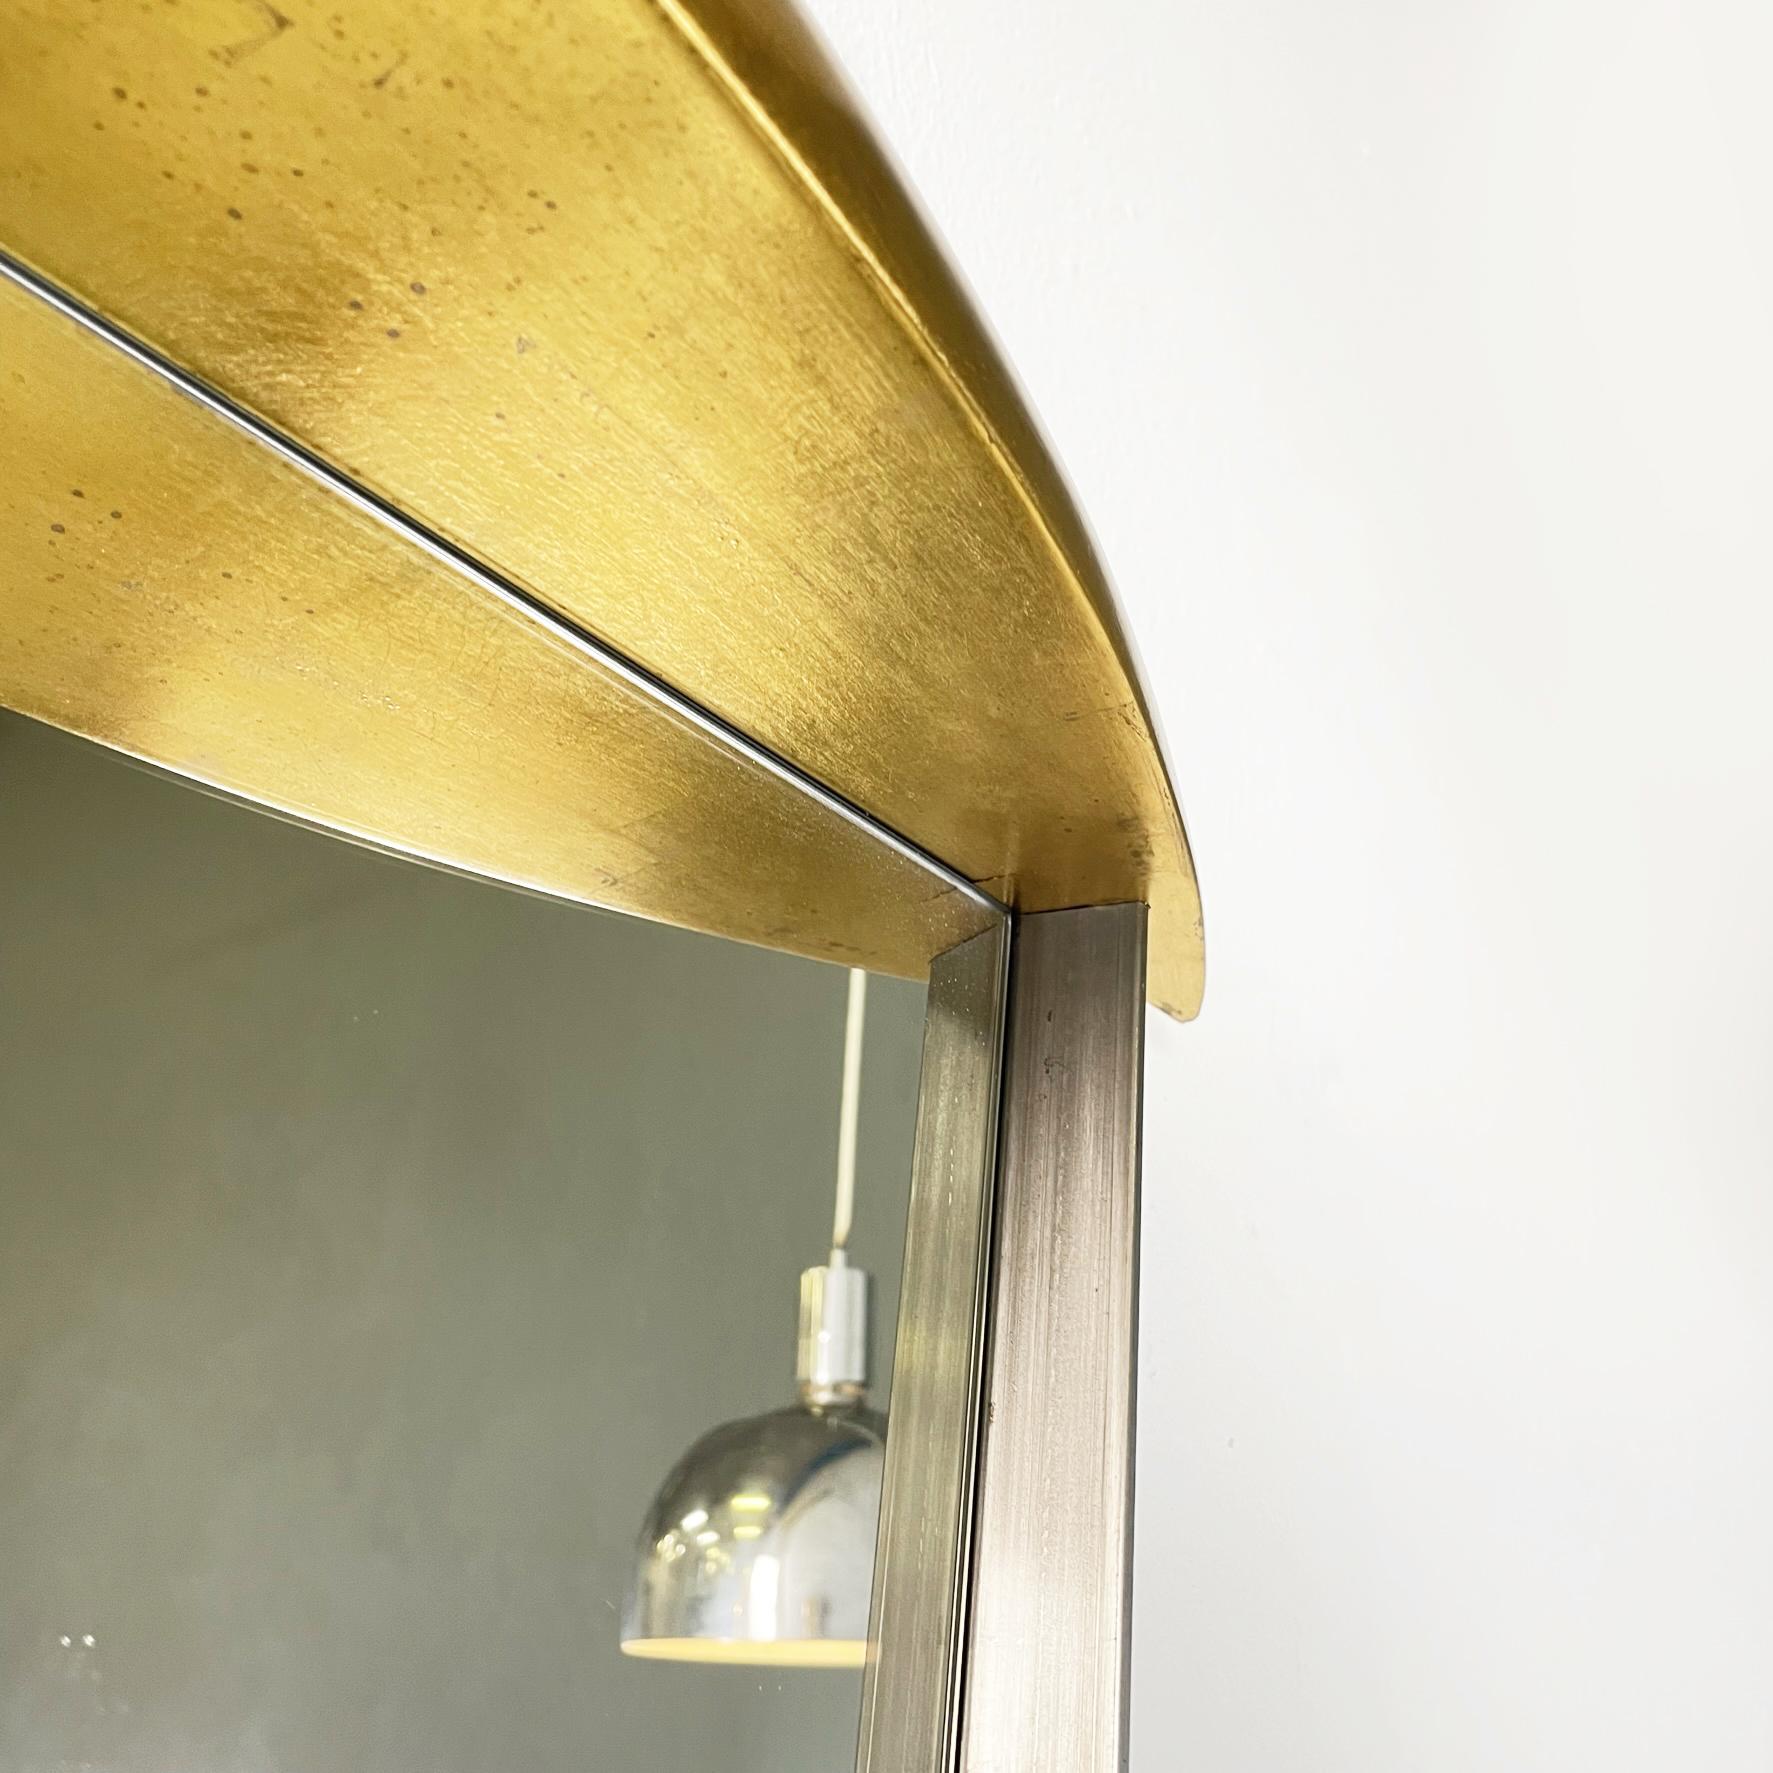 Italian Modern Full-Length Wall Mirror in Gold Wood and Metal, 1980s For Sale 3